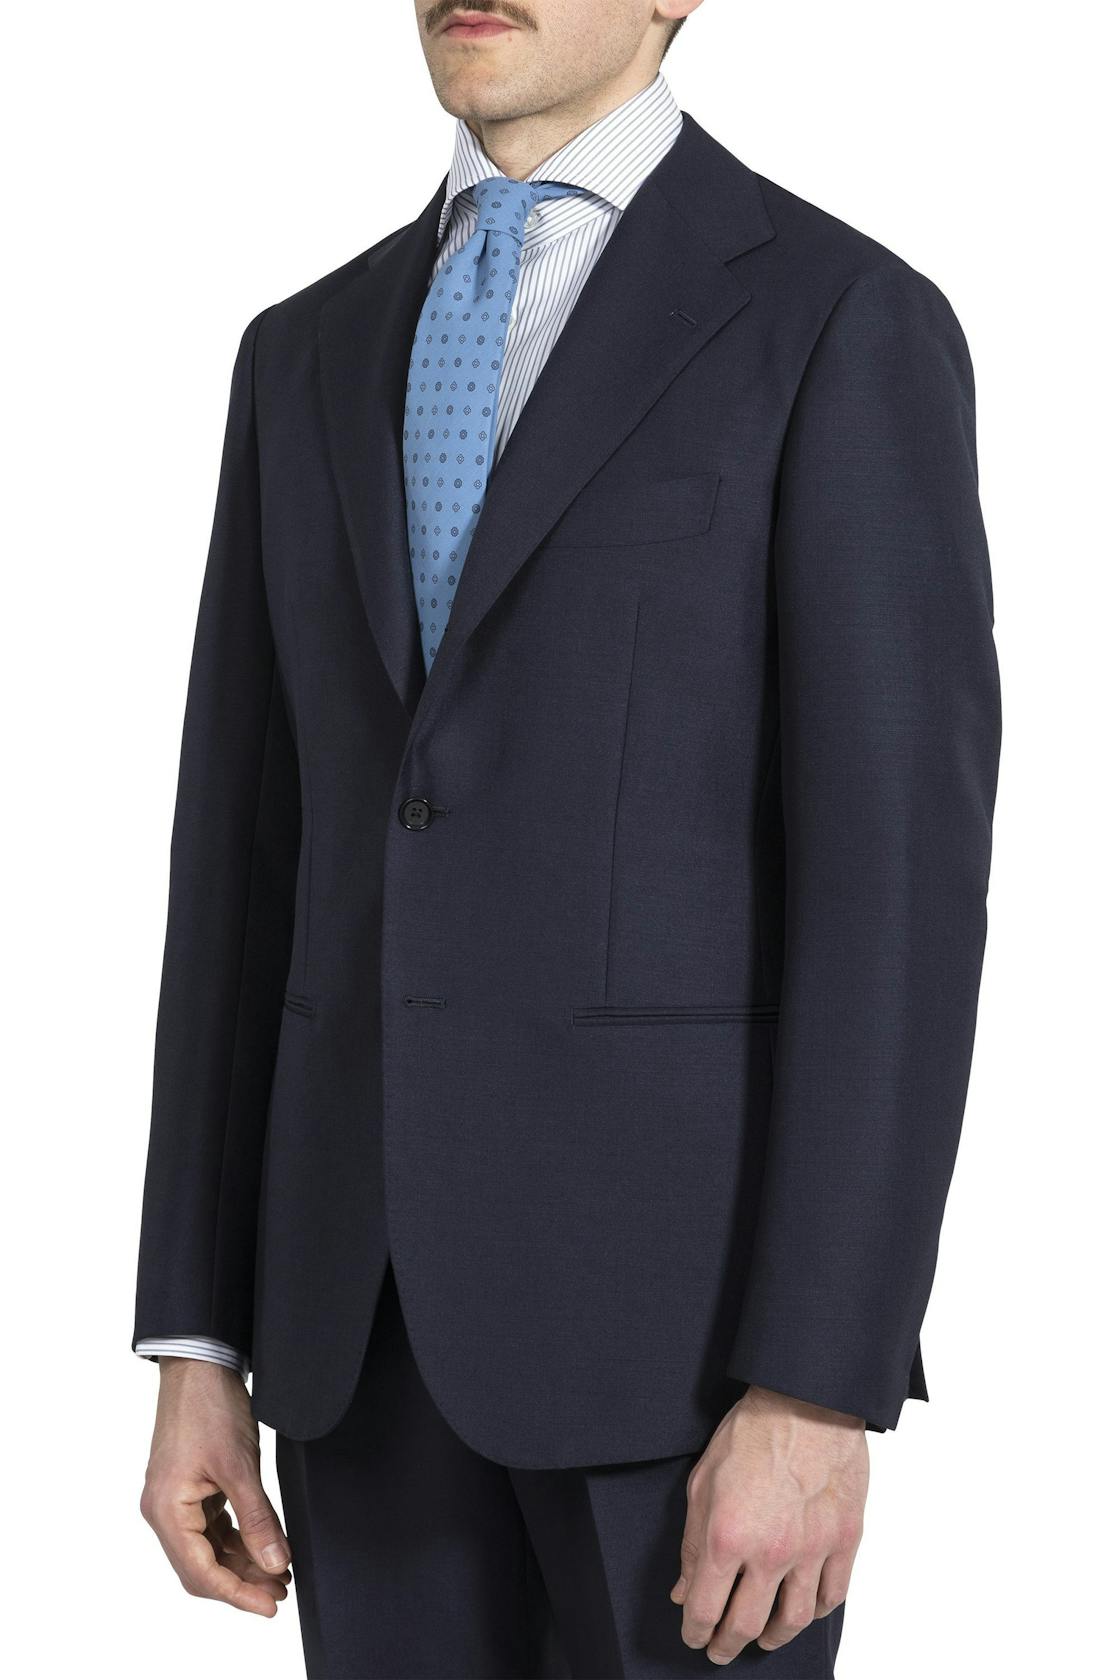 The Armoury by Ring Jacket Model 1B Navy Wool/Mohair Suit